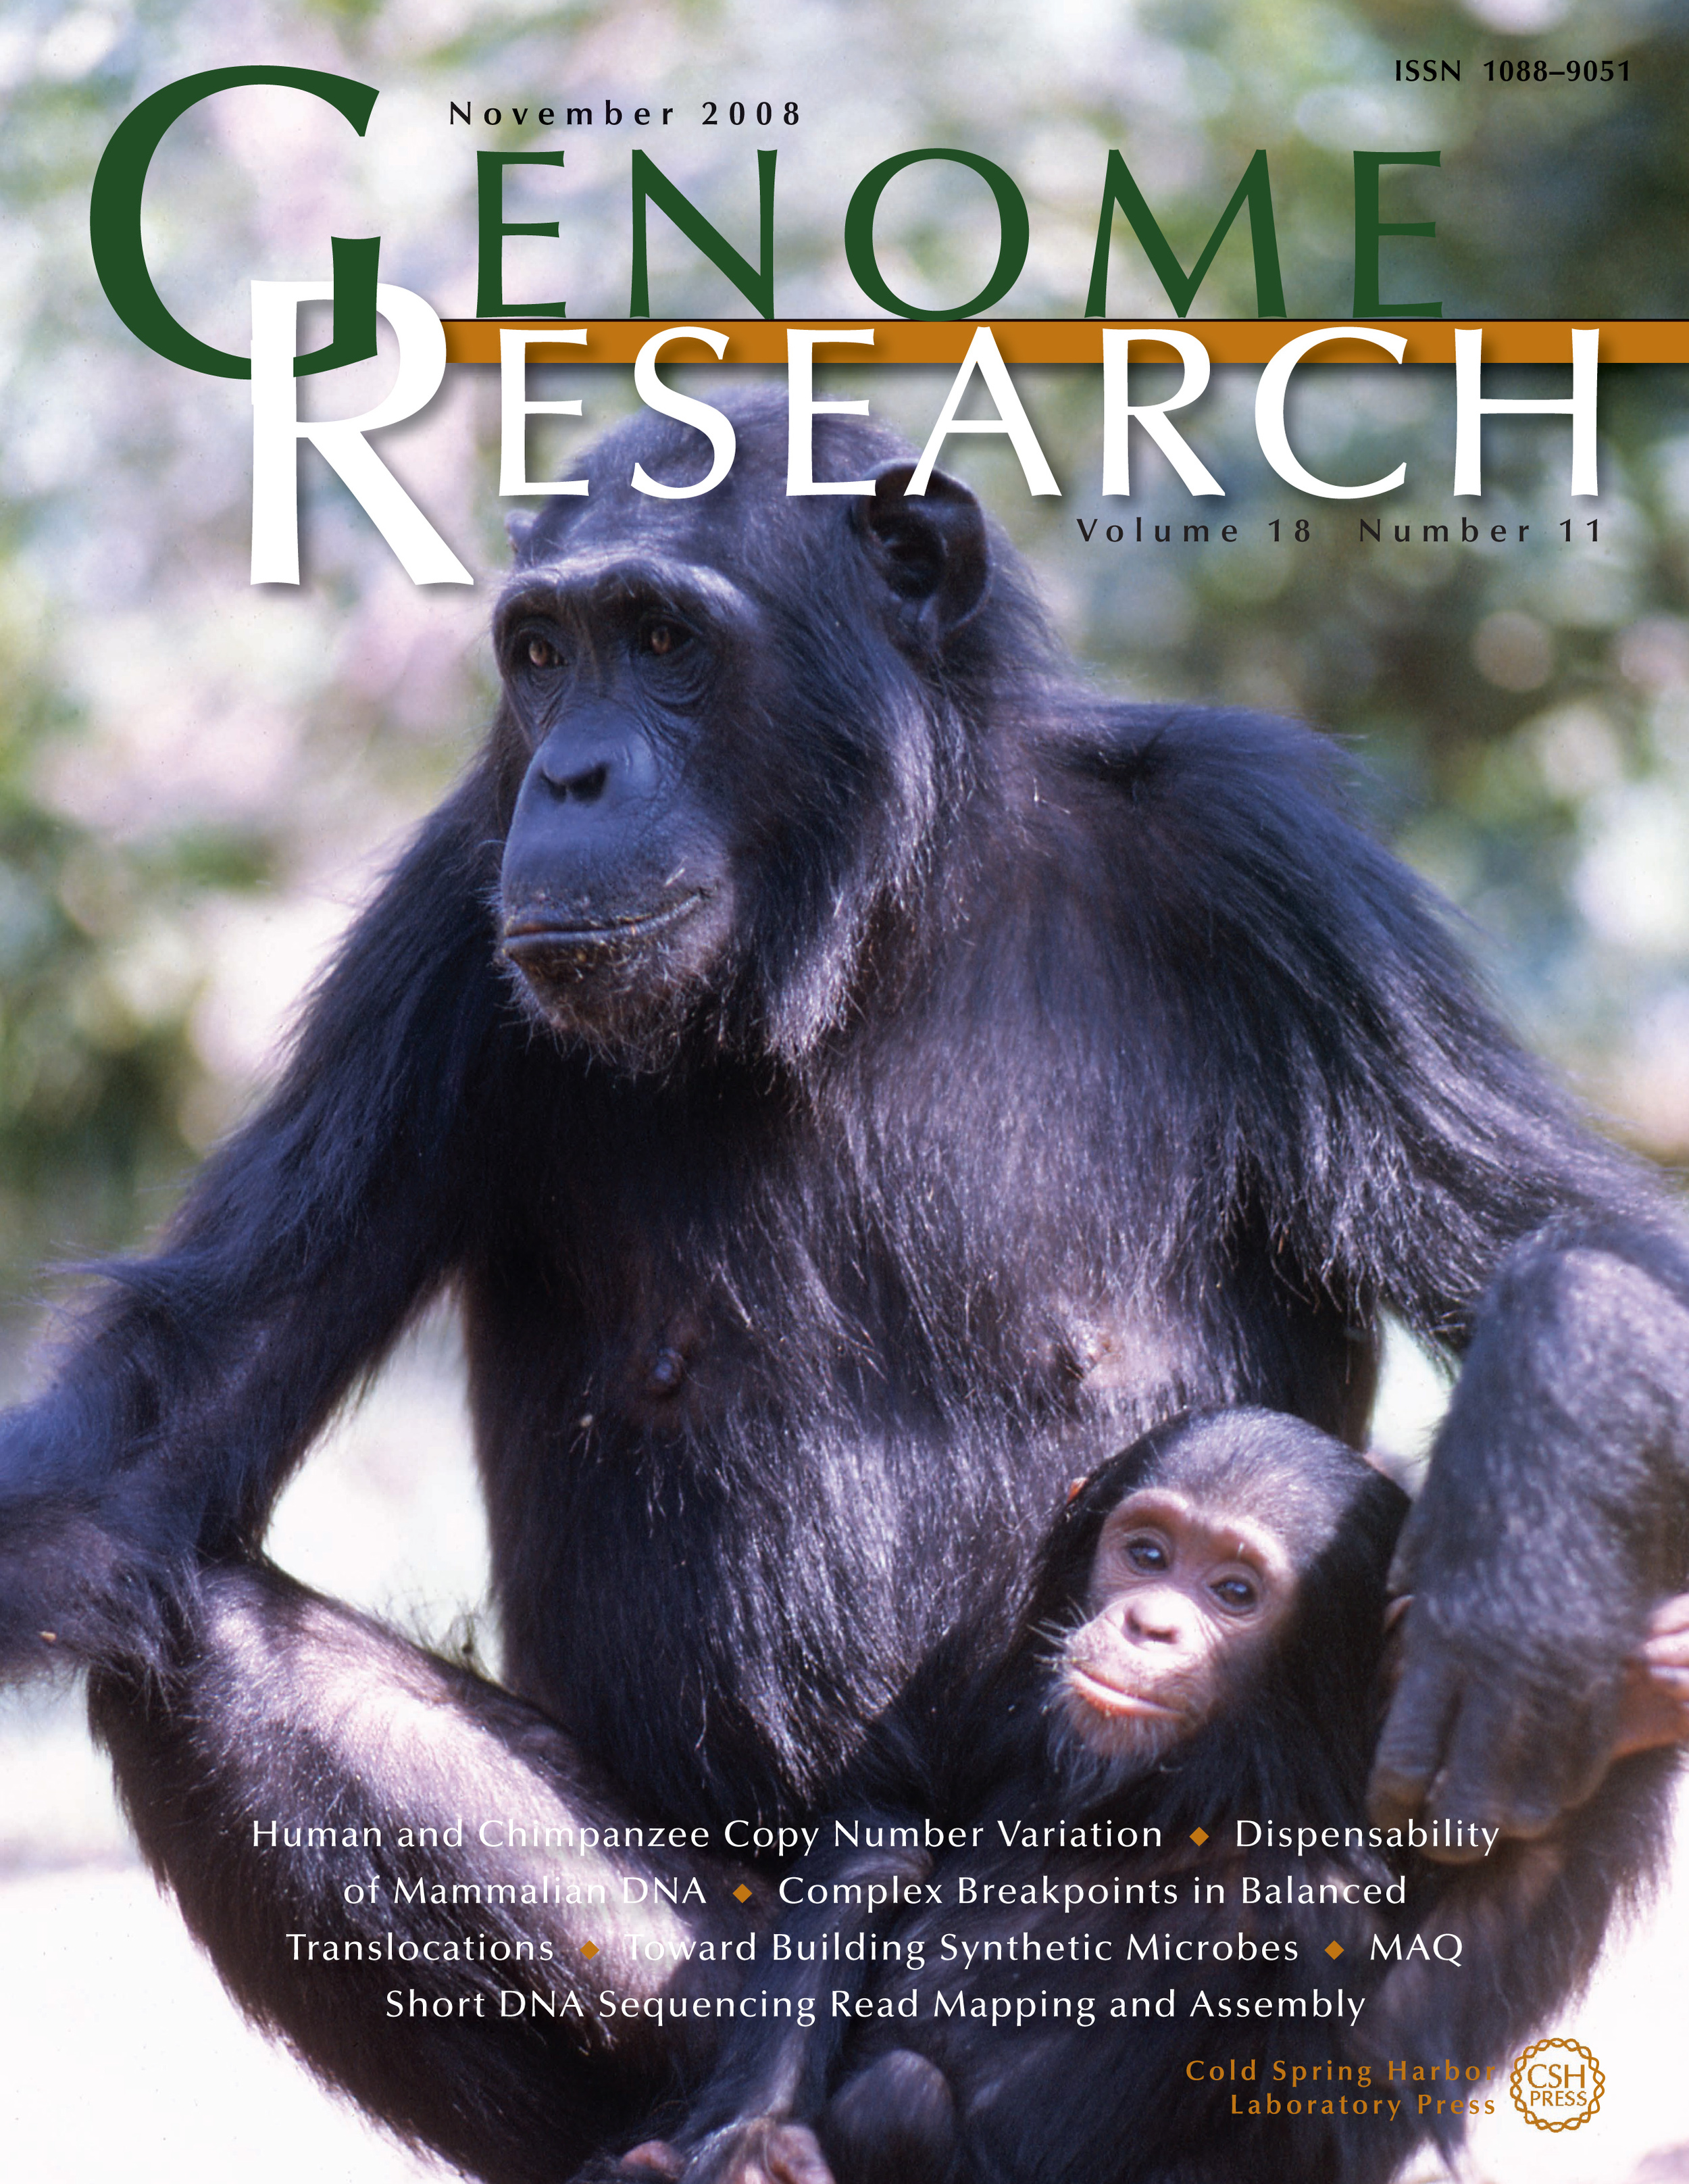   Genome Research  cover for&nbsp; Perry et al. (2008) . Cover photo by Leanne Nash. 